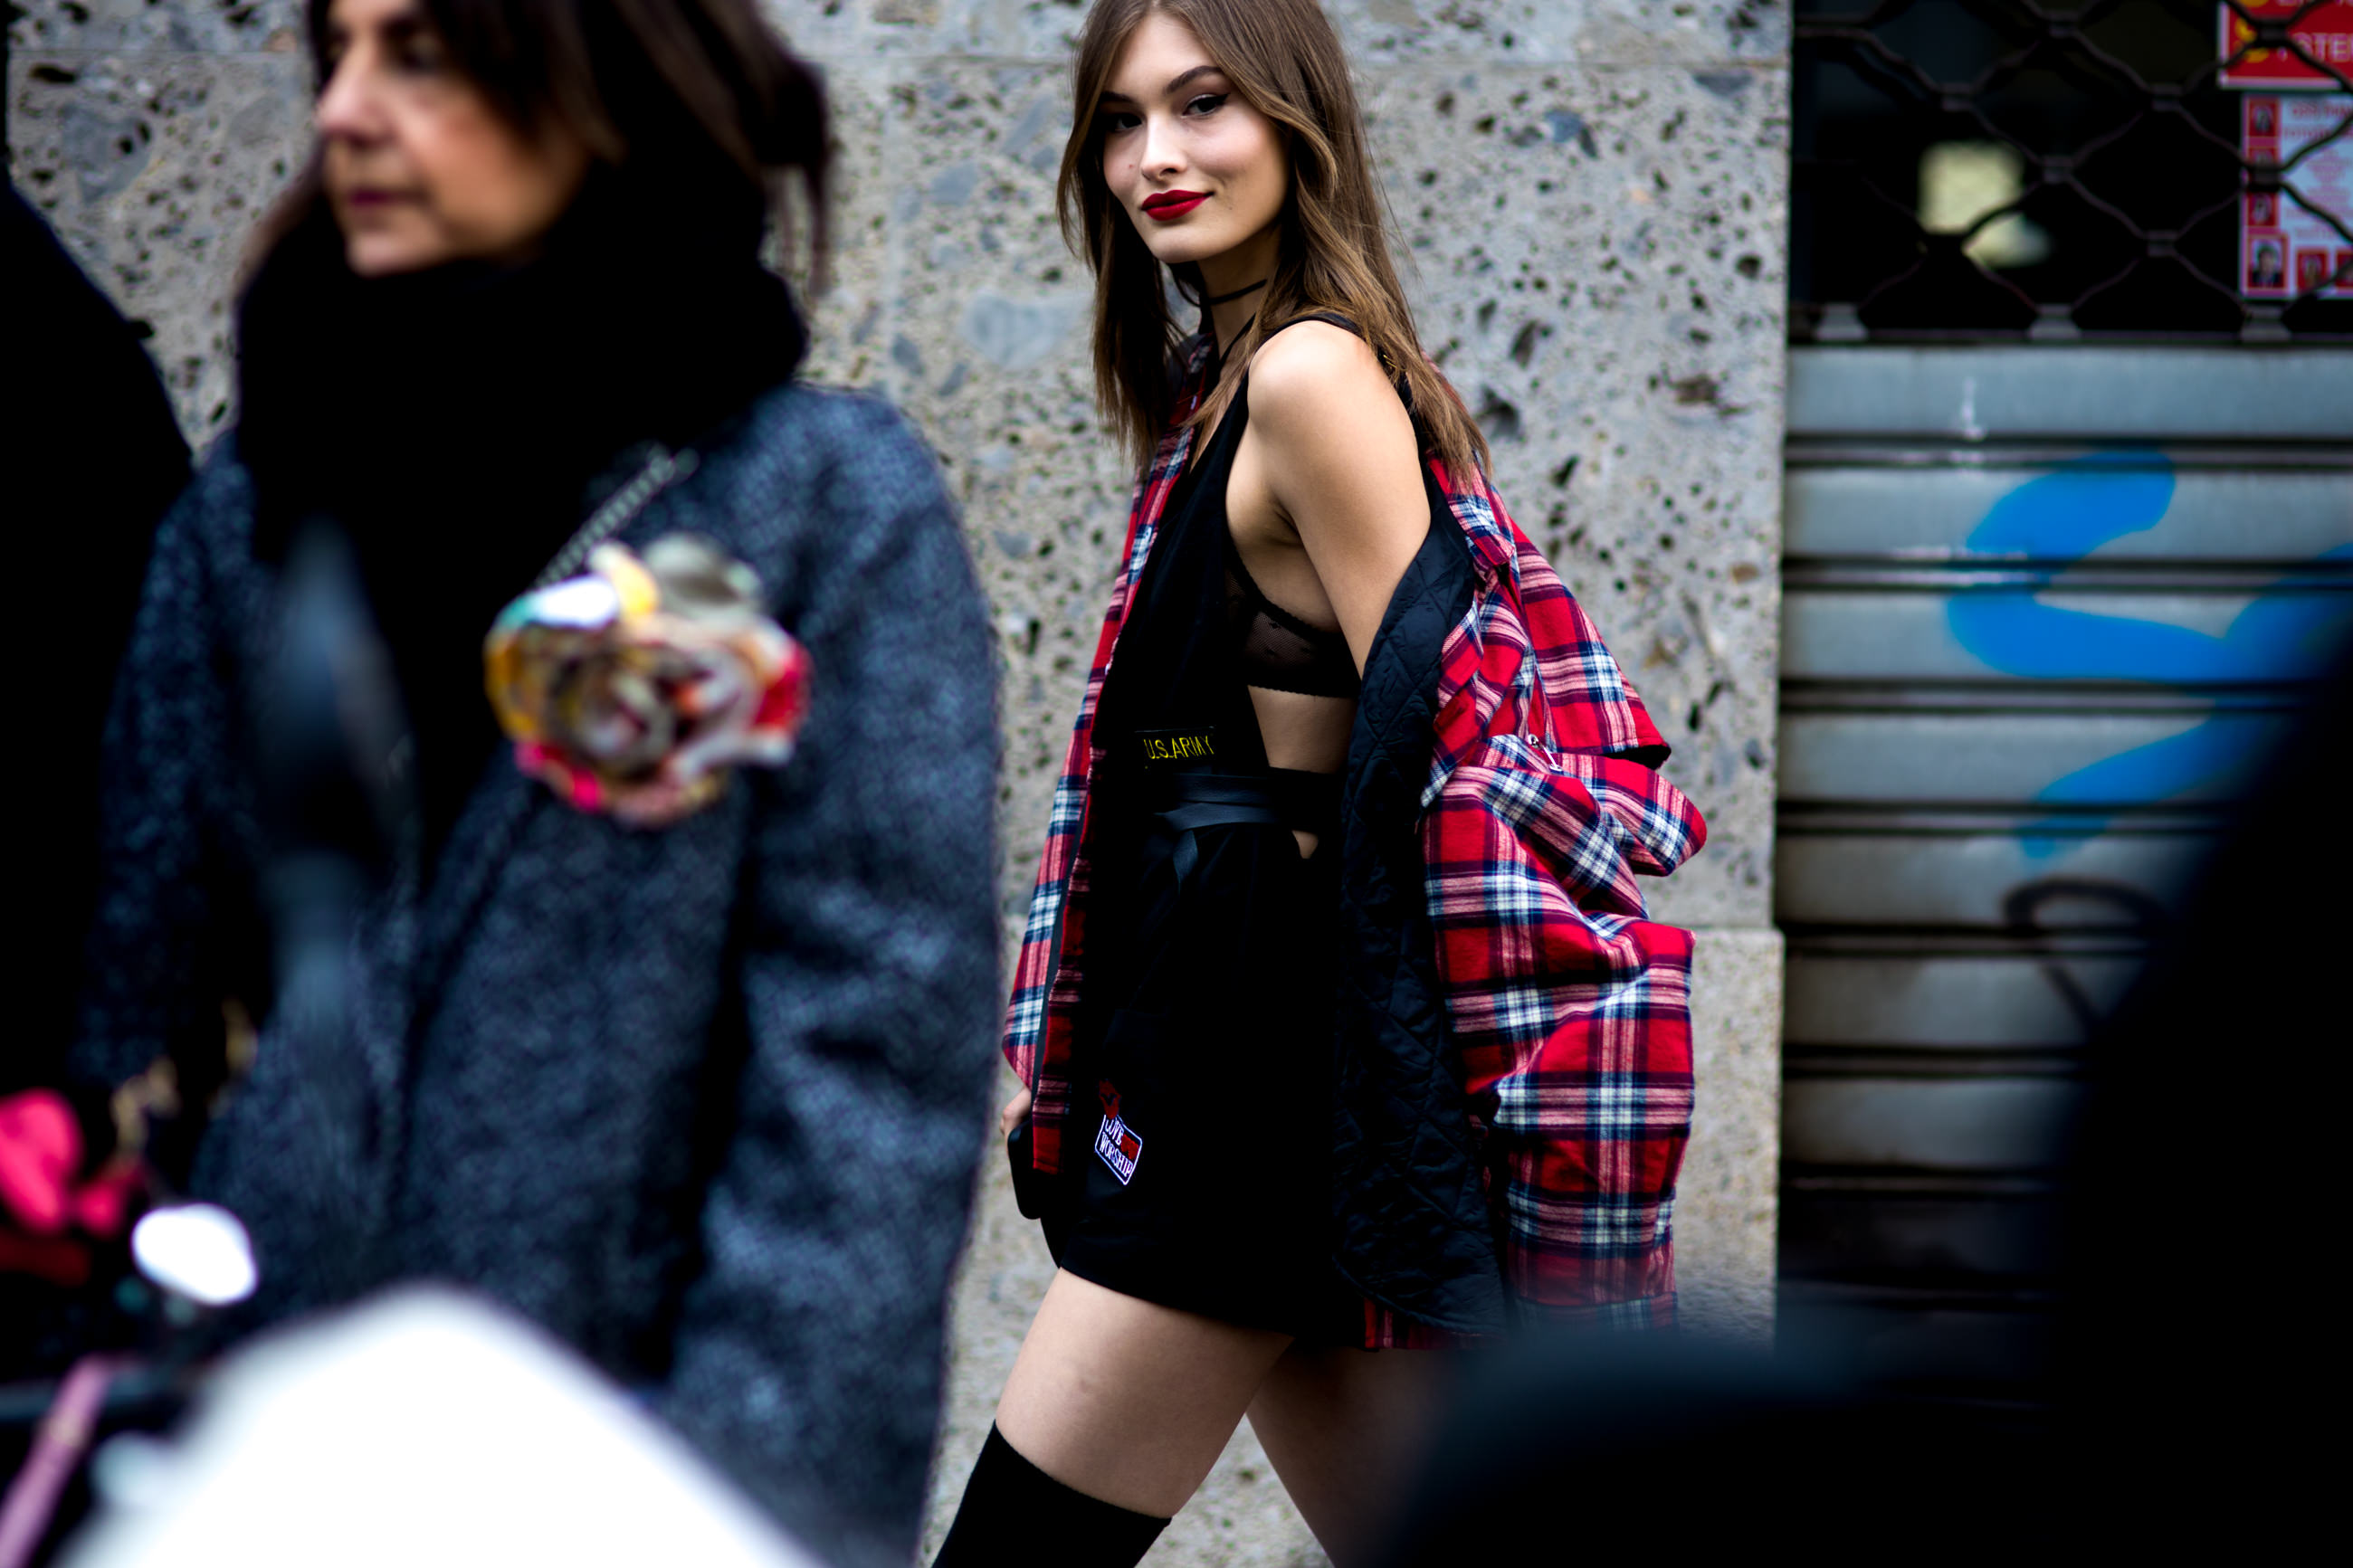 MFW FW17 Street Style: Grace Elizabeth wearing a plaid shirt after walking for Dolce & Gabbana FW 2017-2018 fashion show in Milan, Italy